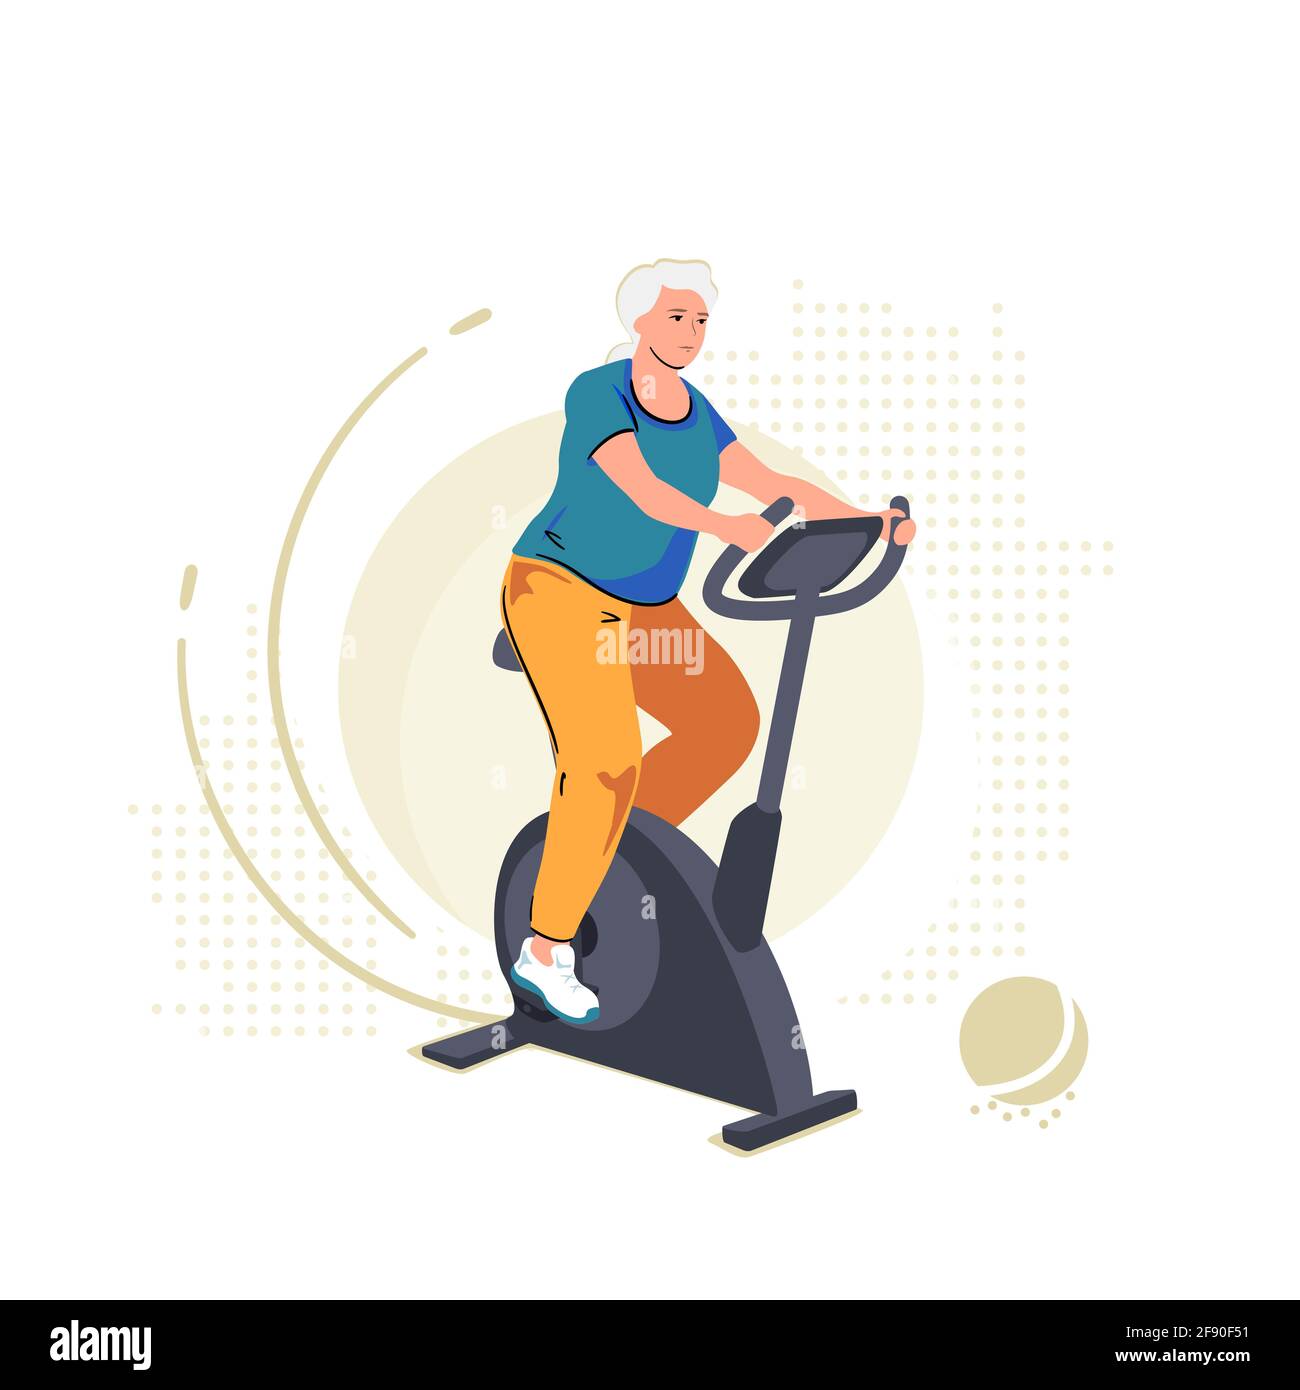 Elderly senior woman on exercise bike. Home workout training on stationary bicycle. Sport indoor retirement, active mature pensioner illustration Stock Vector